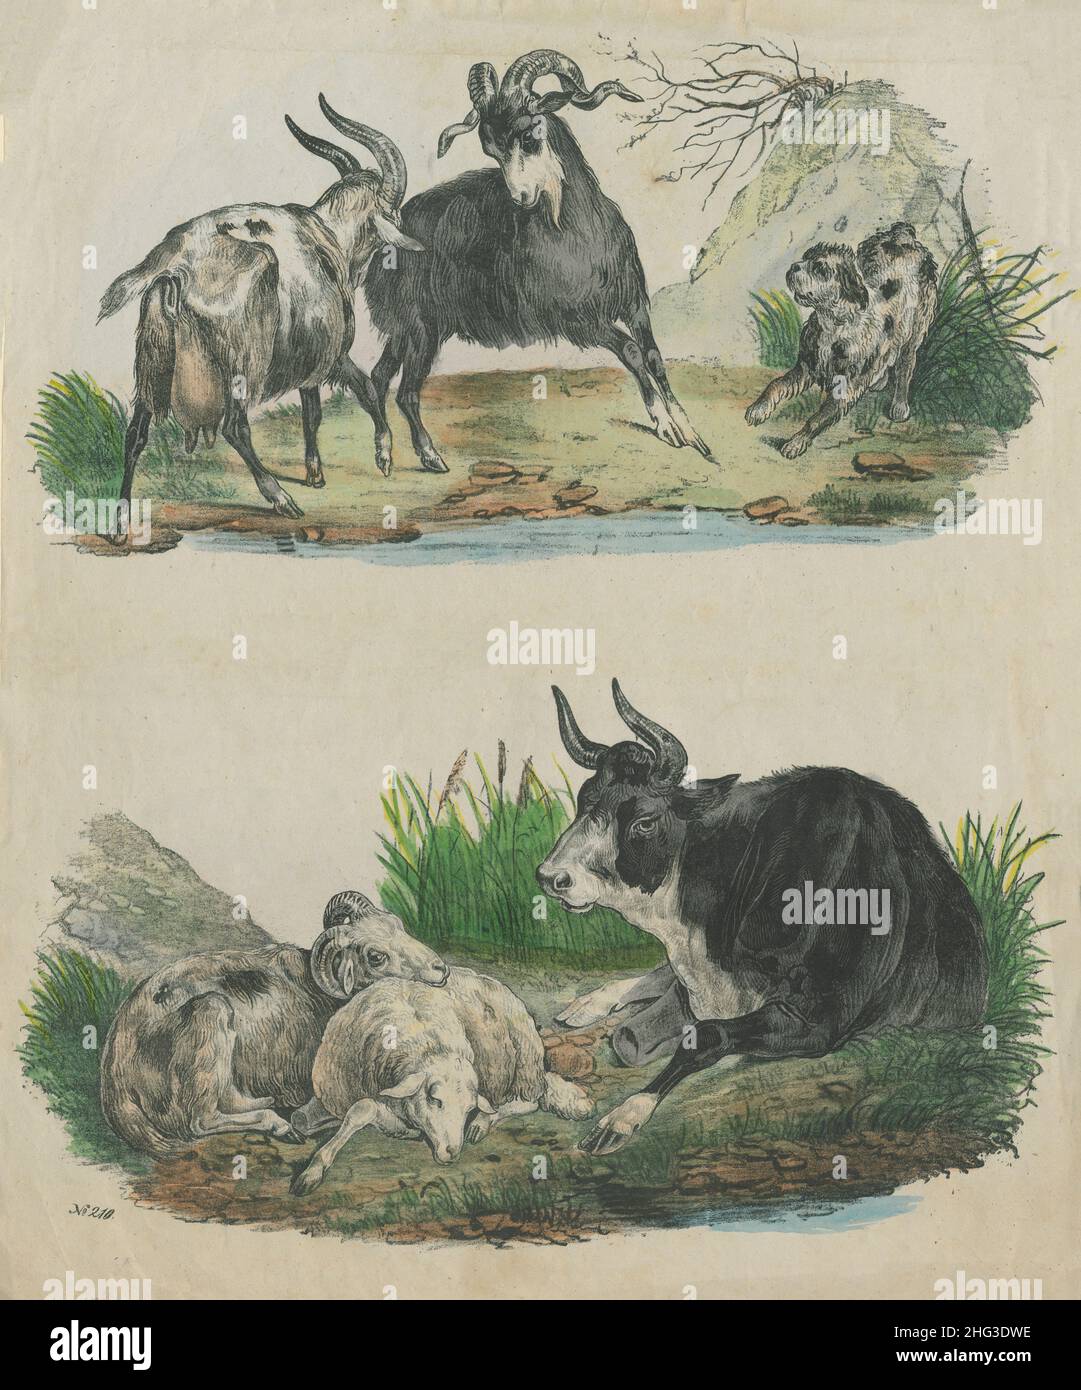 The 19th century vintage illustration of domestic animals. 1860 The color lithograph of sheeps, dog, goats, and cow. Stock Photo